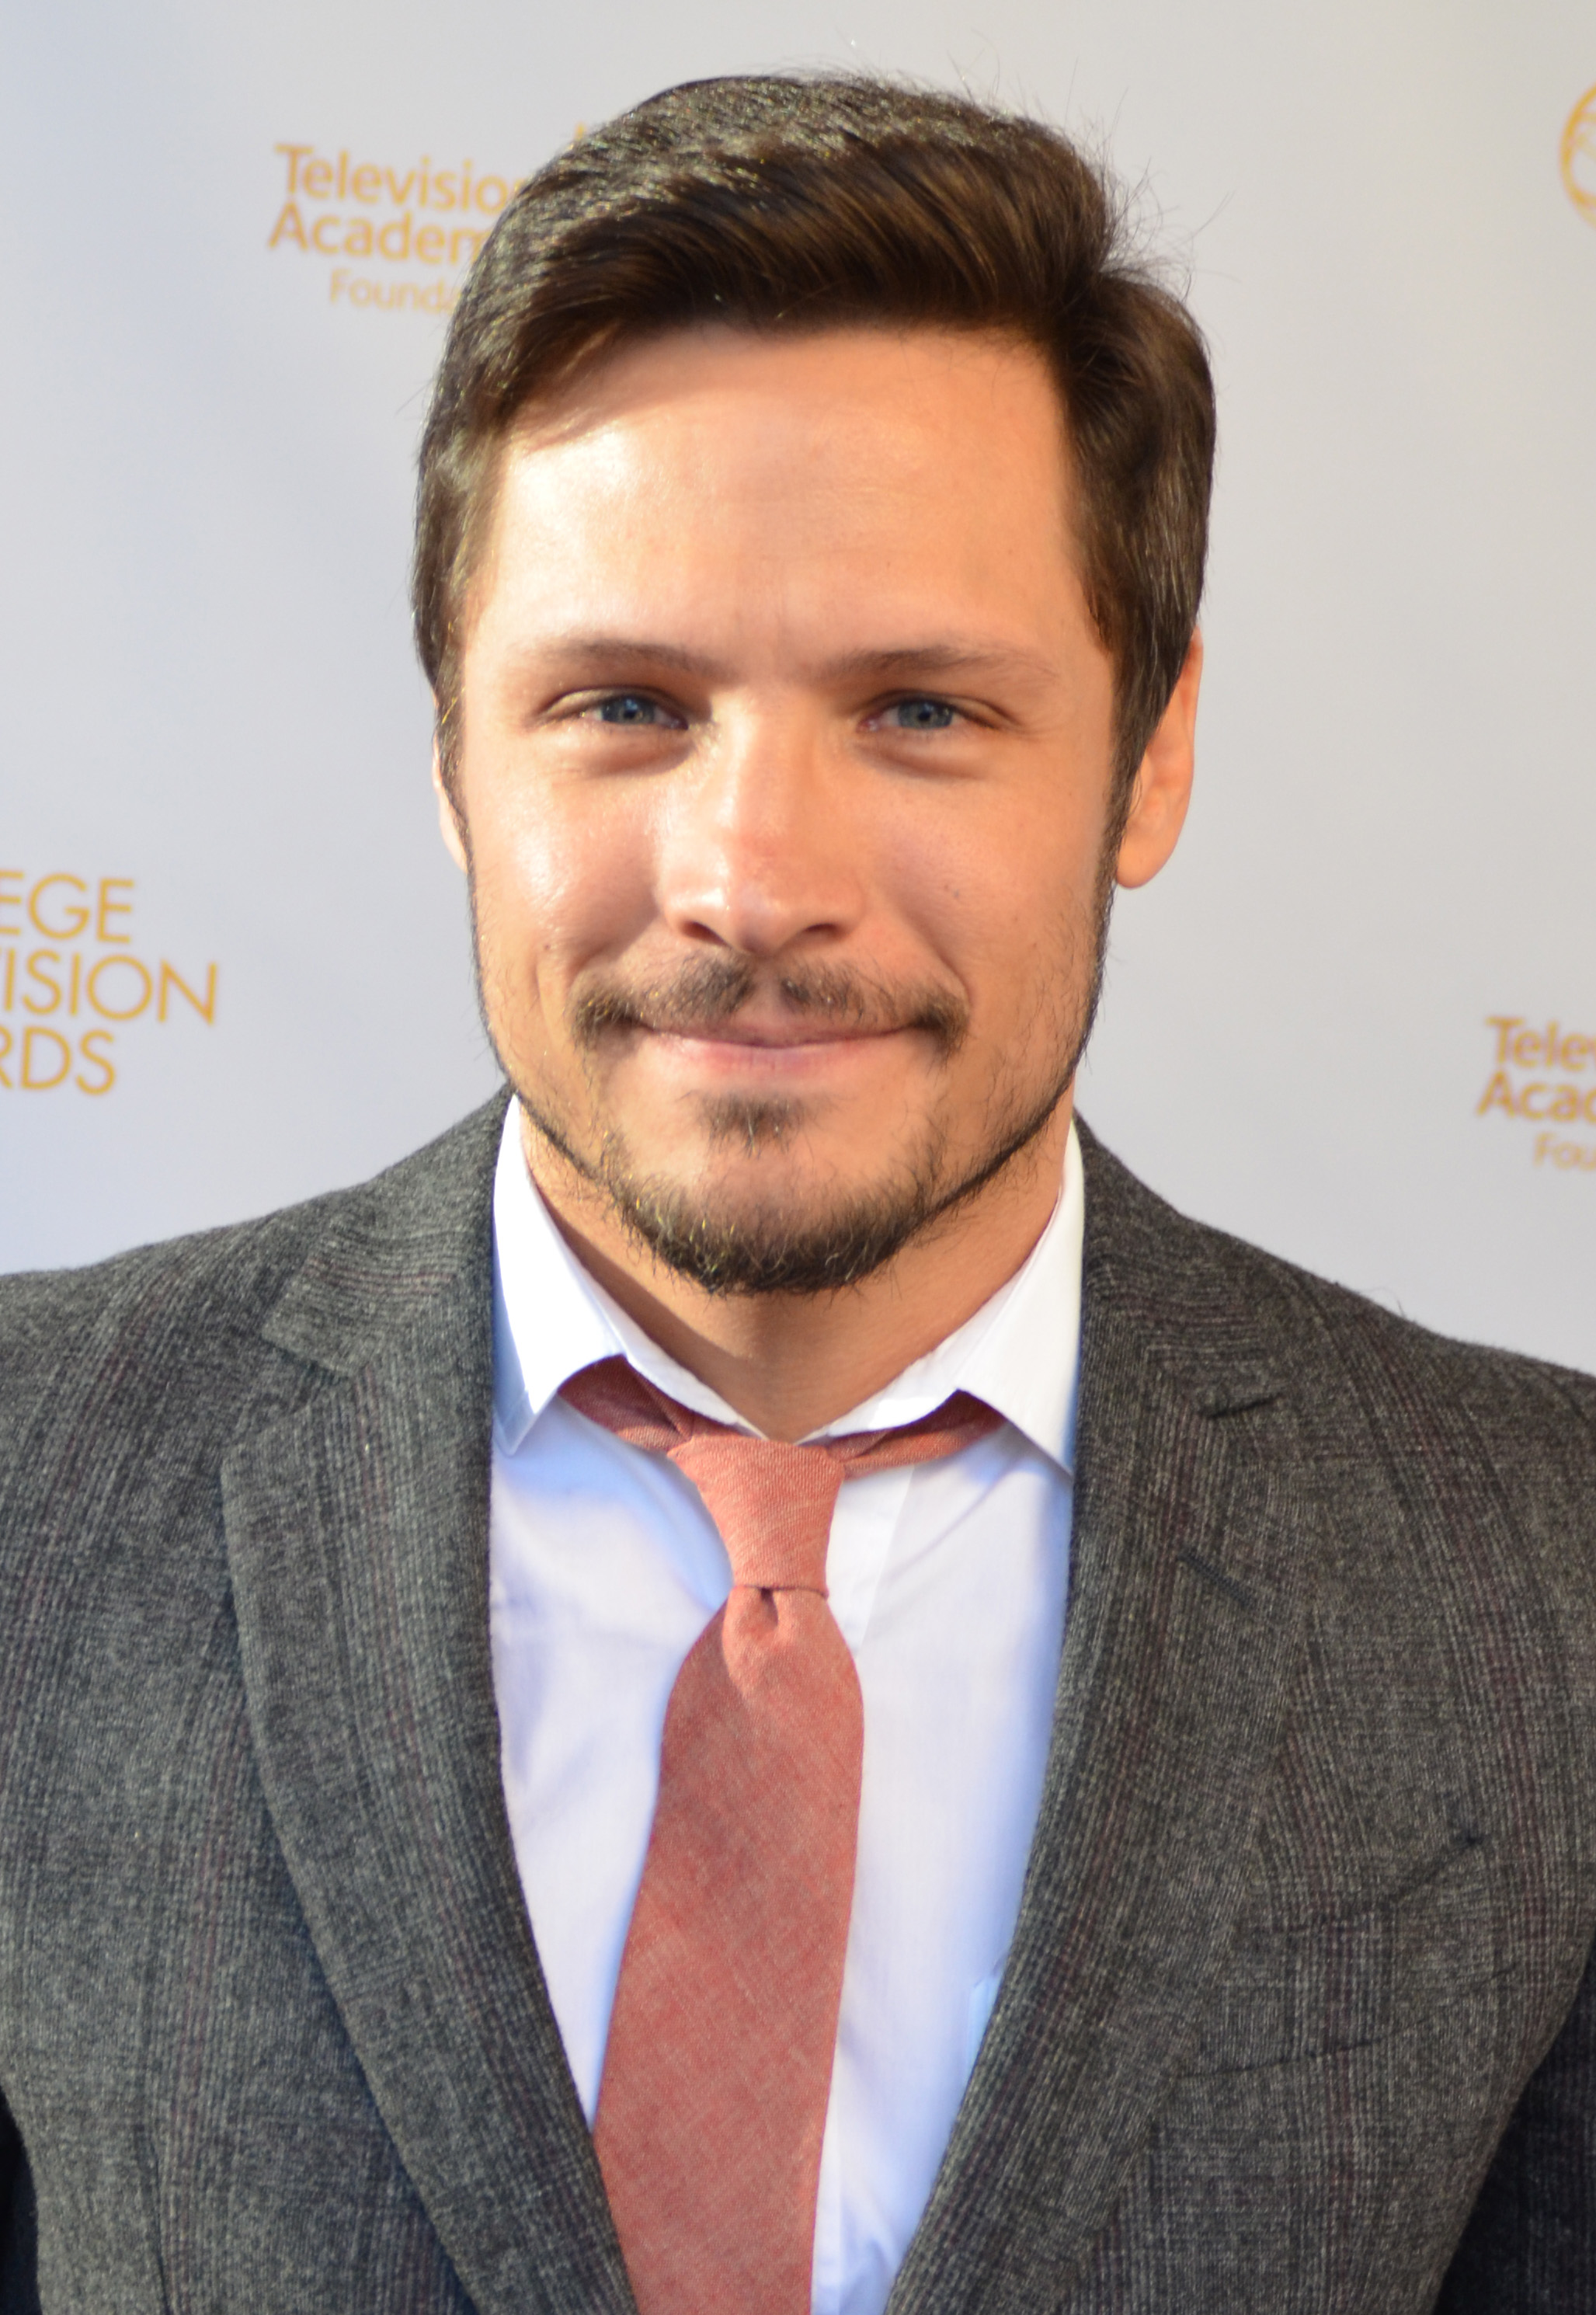 The 45-year old son of father Joseph A. Wechsler and mother Janet Ruth Wechsler Nick Wechsler in 2024 photo. Nick Wechsler earned a 0.32 million dollar salary - leaving the net worth at 2.7 million in 2024